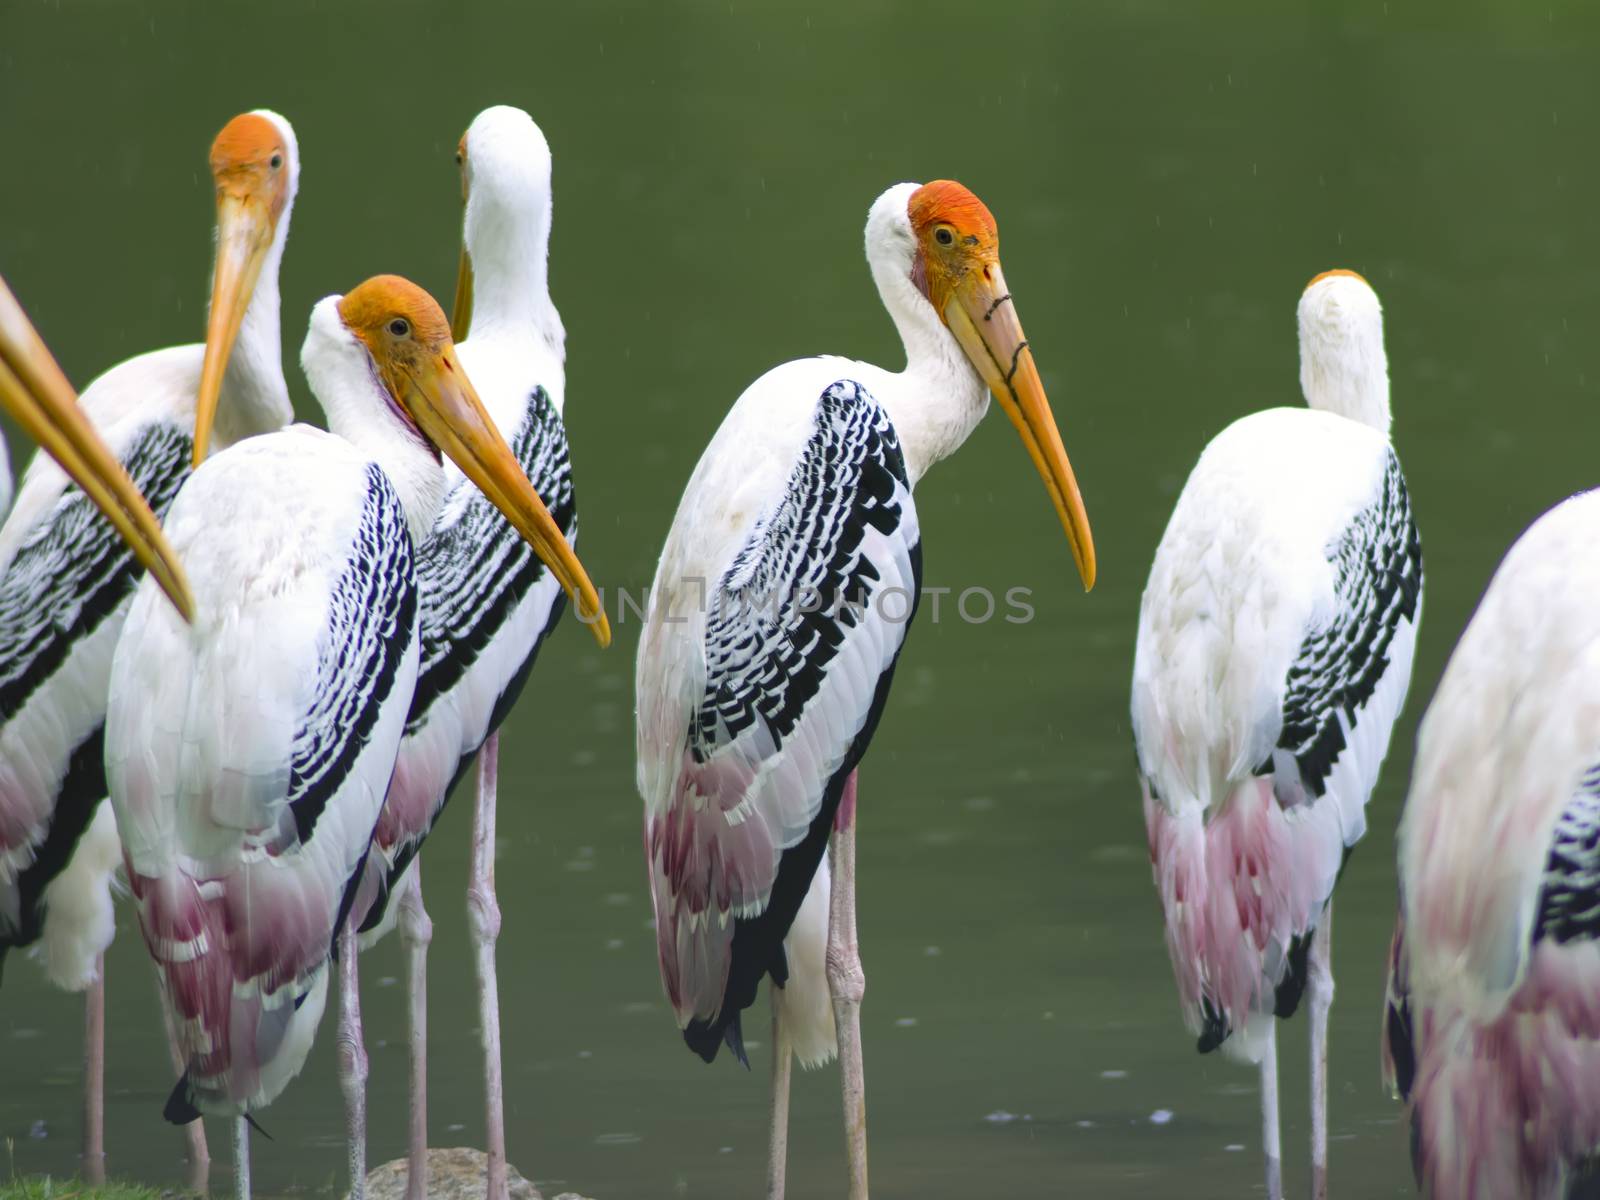 Painted Stork (Mycteria leucocephala) is a large wading bird in the stork family.